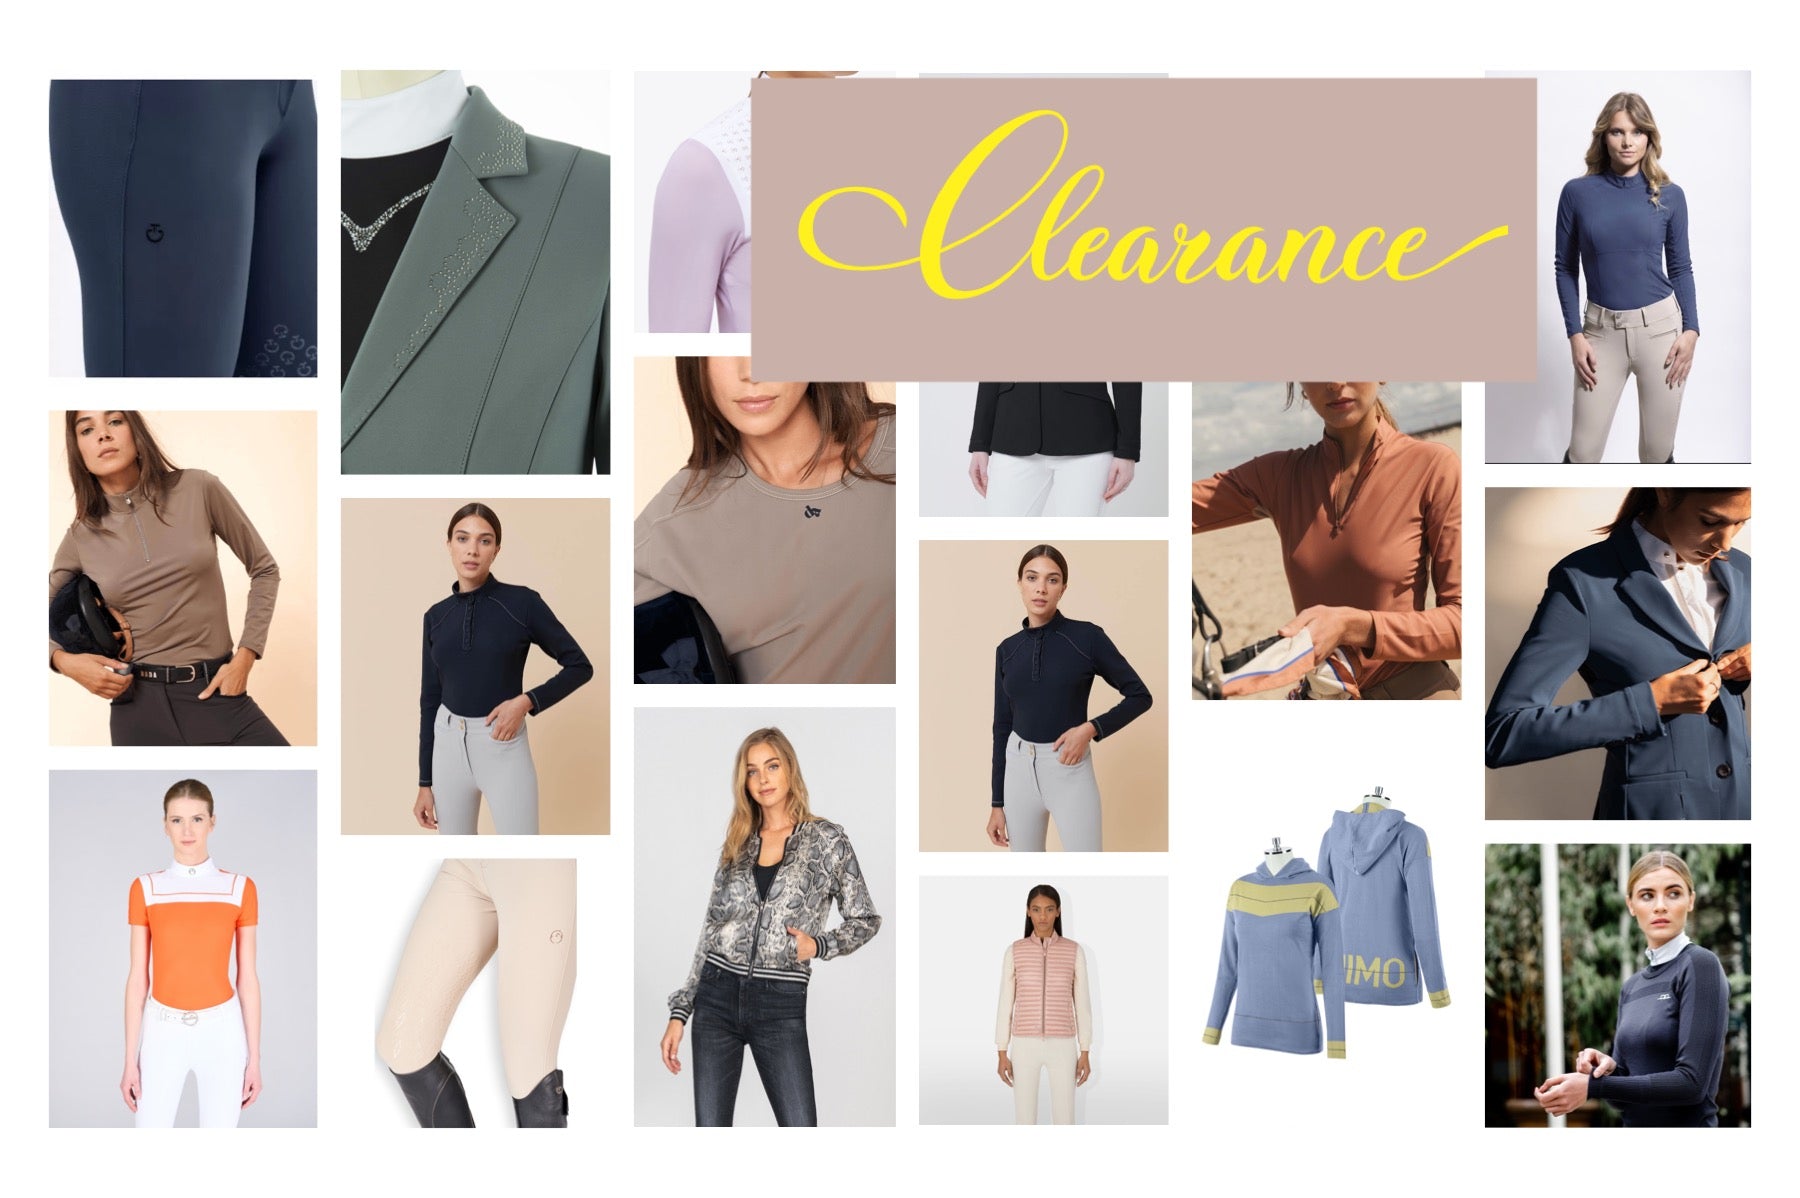 LUXE – Chic Couture Online